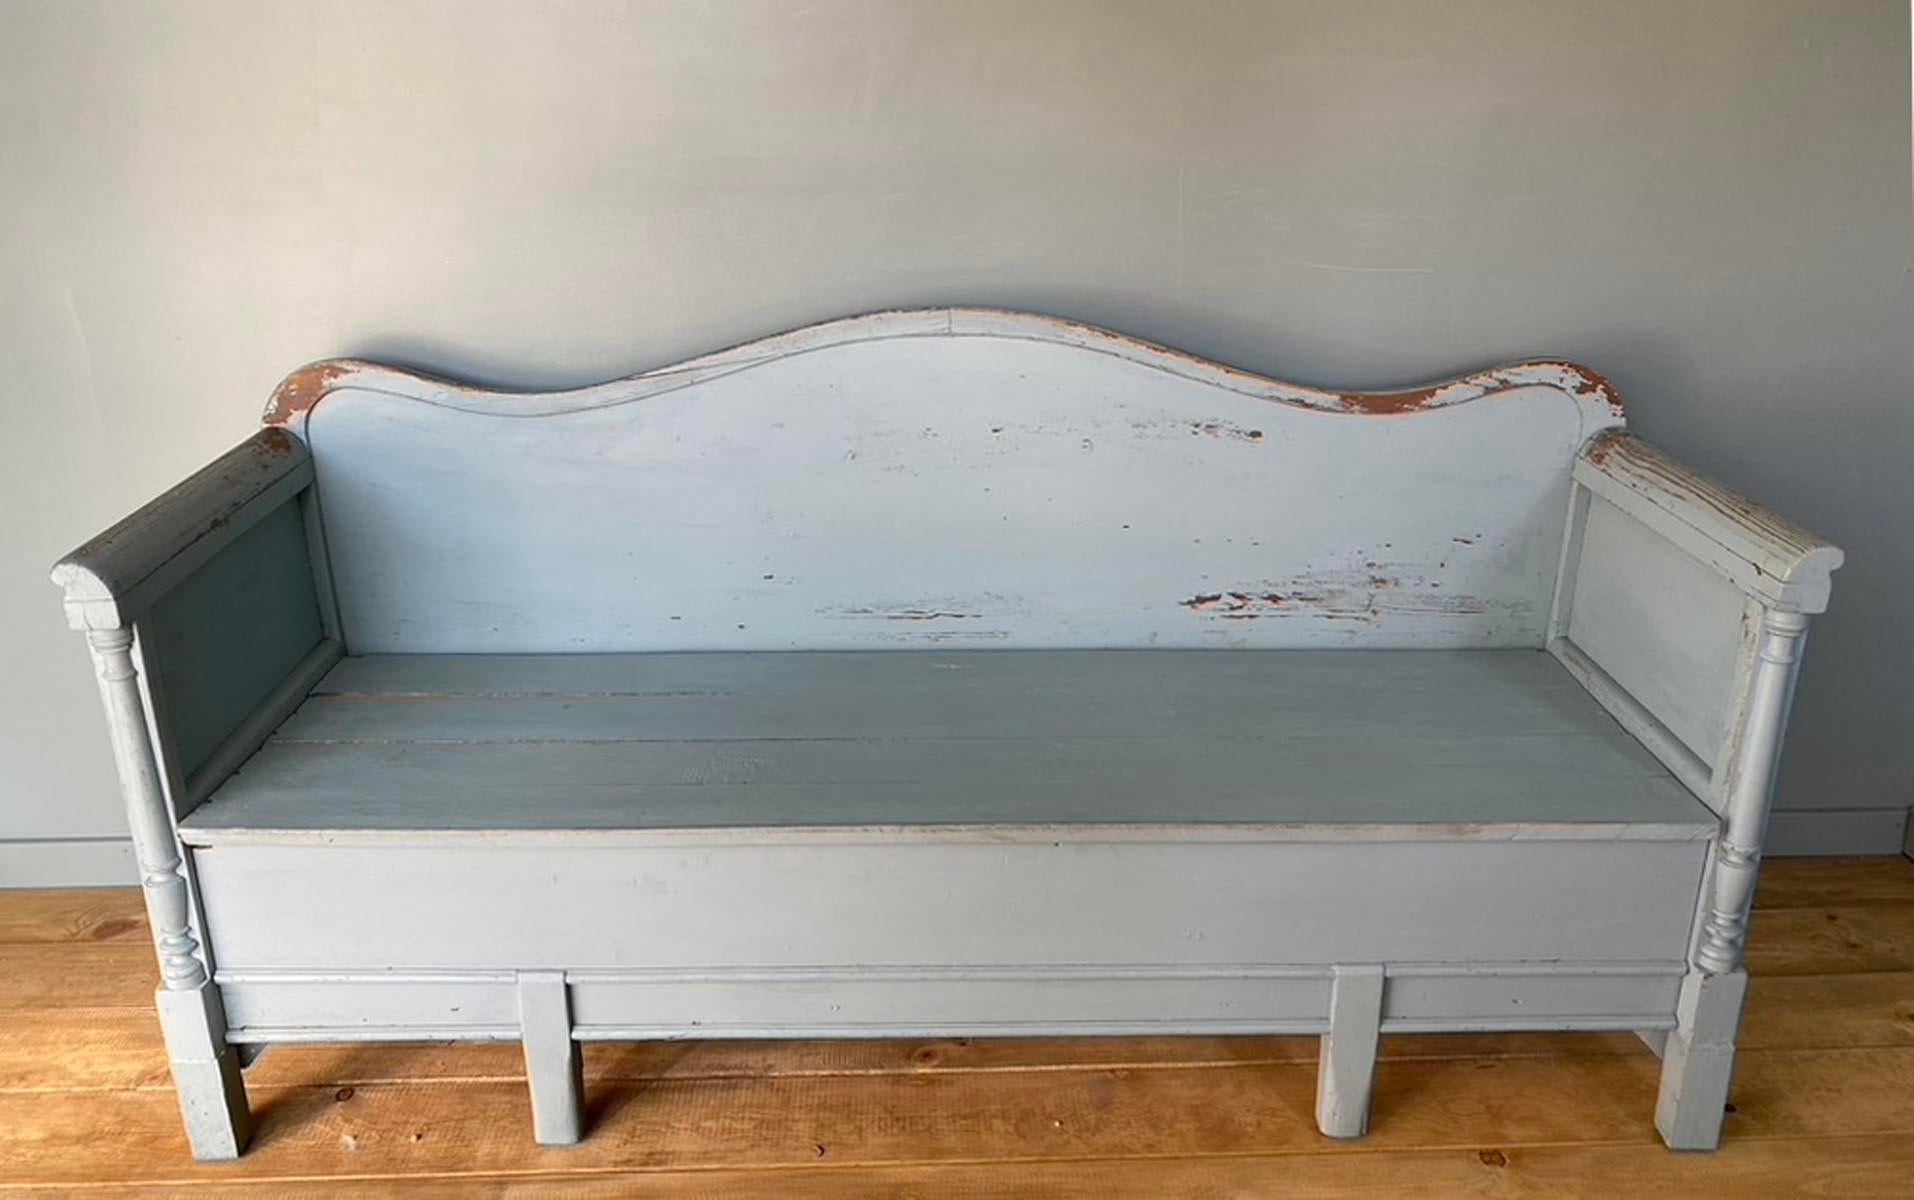 Turn of the 19th - 20th century Swedish lift top bench or bed in a light blue color. These were placed in farm house kitchens and typically the milkmaid's bed, thus the name 